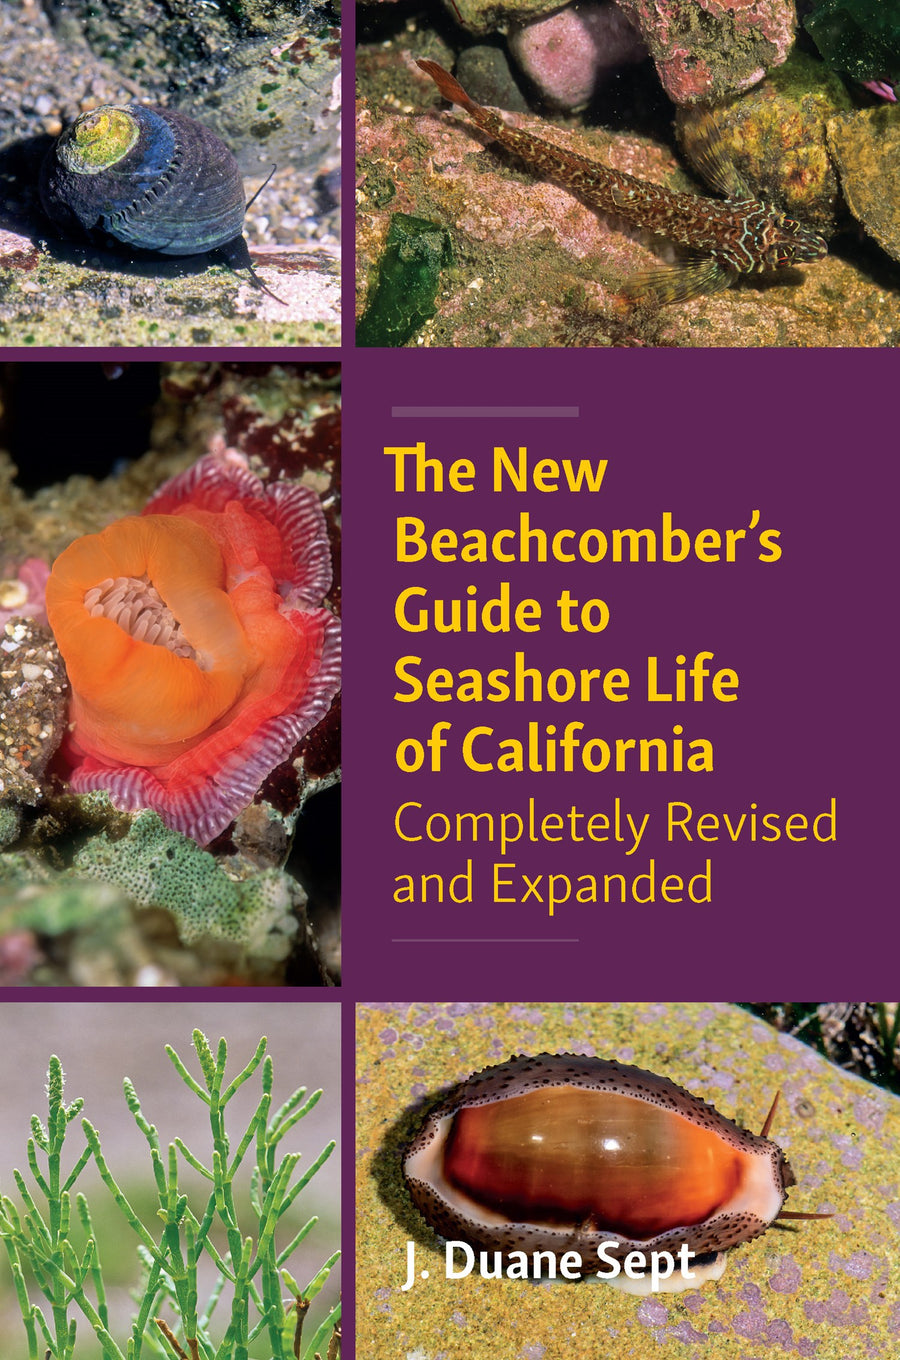 The New Beachcomber’s Guide to Seashore Life of California : Completely Revised and Expanded